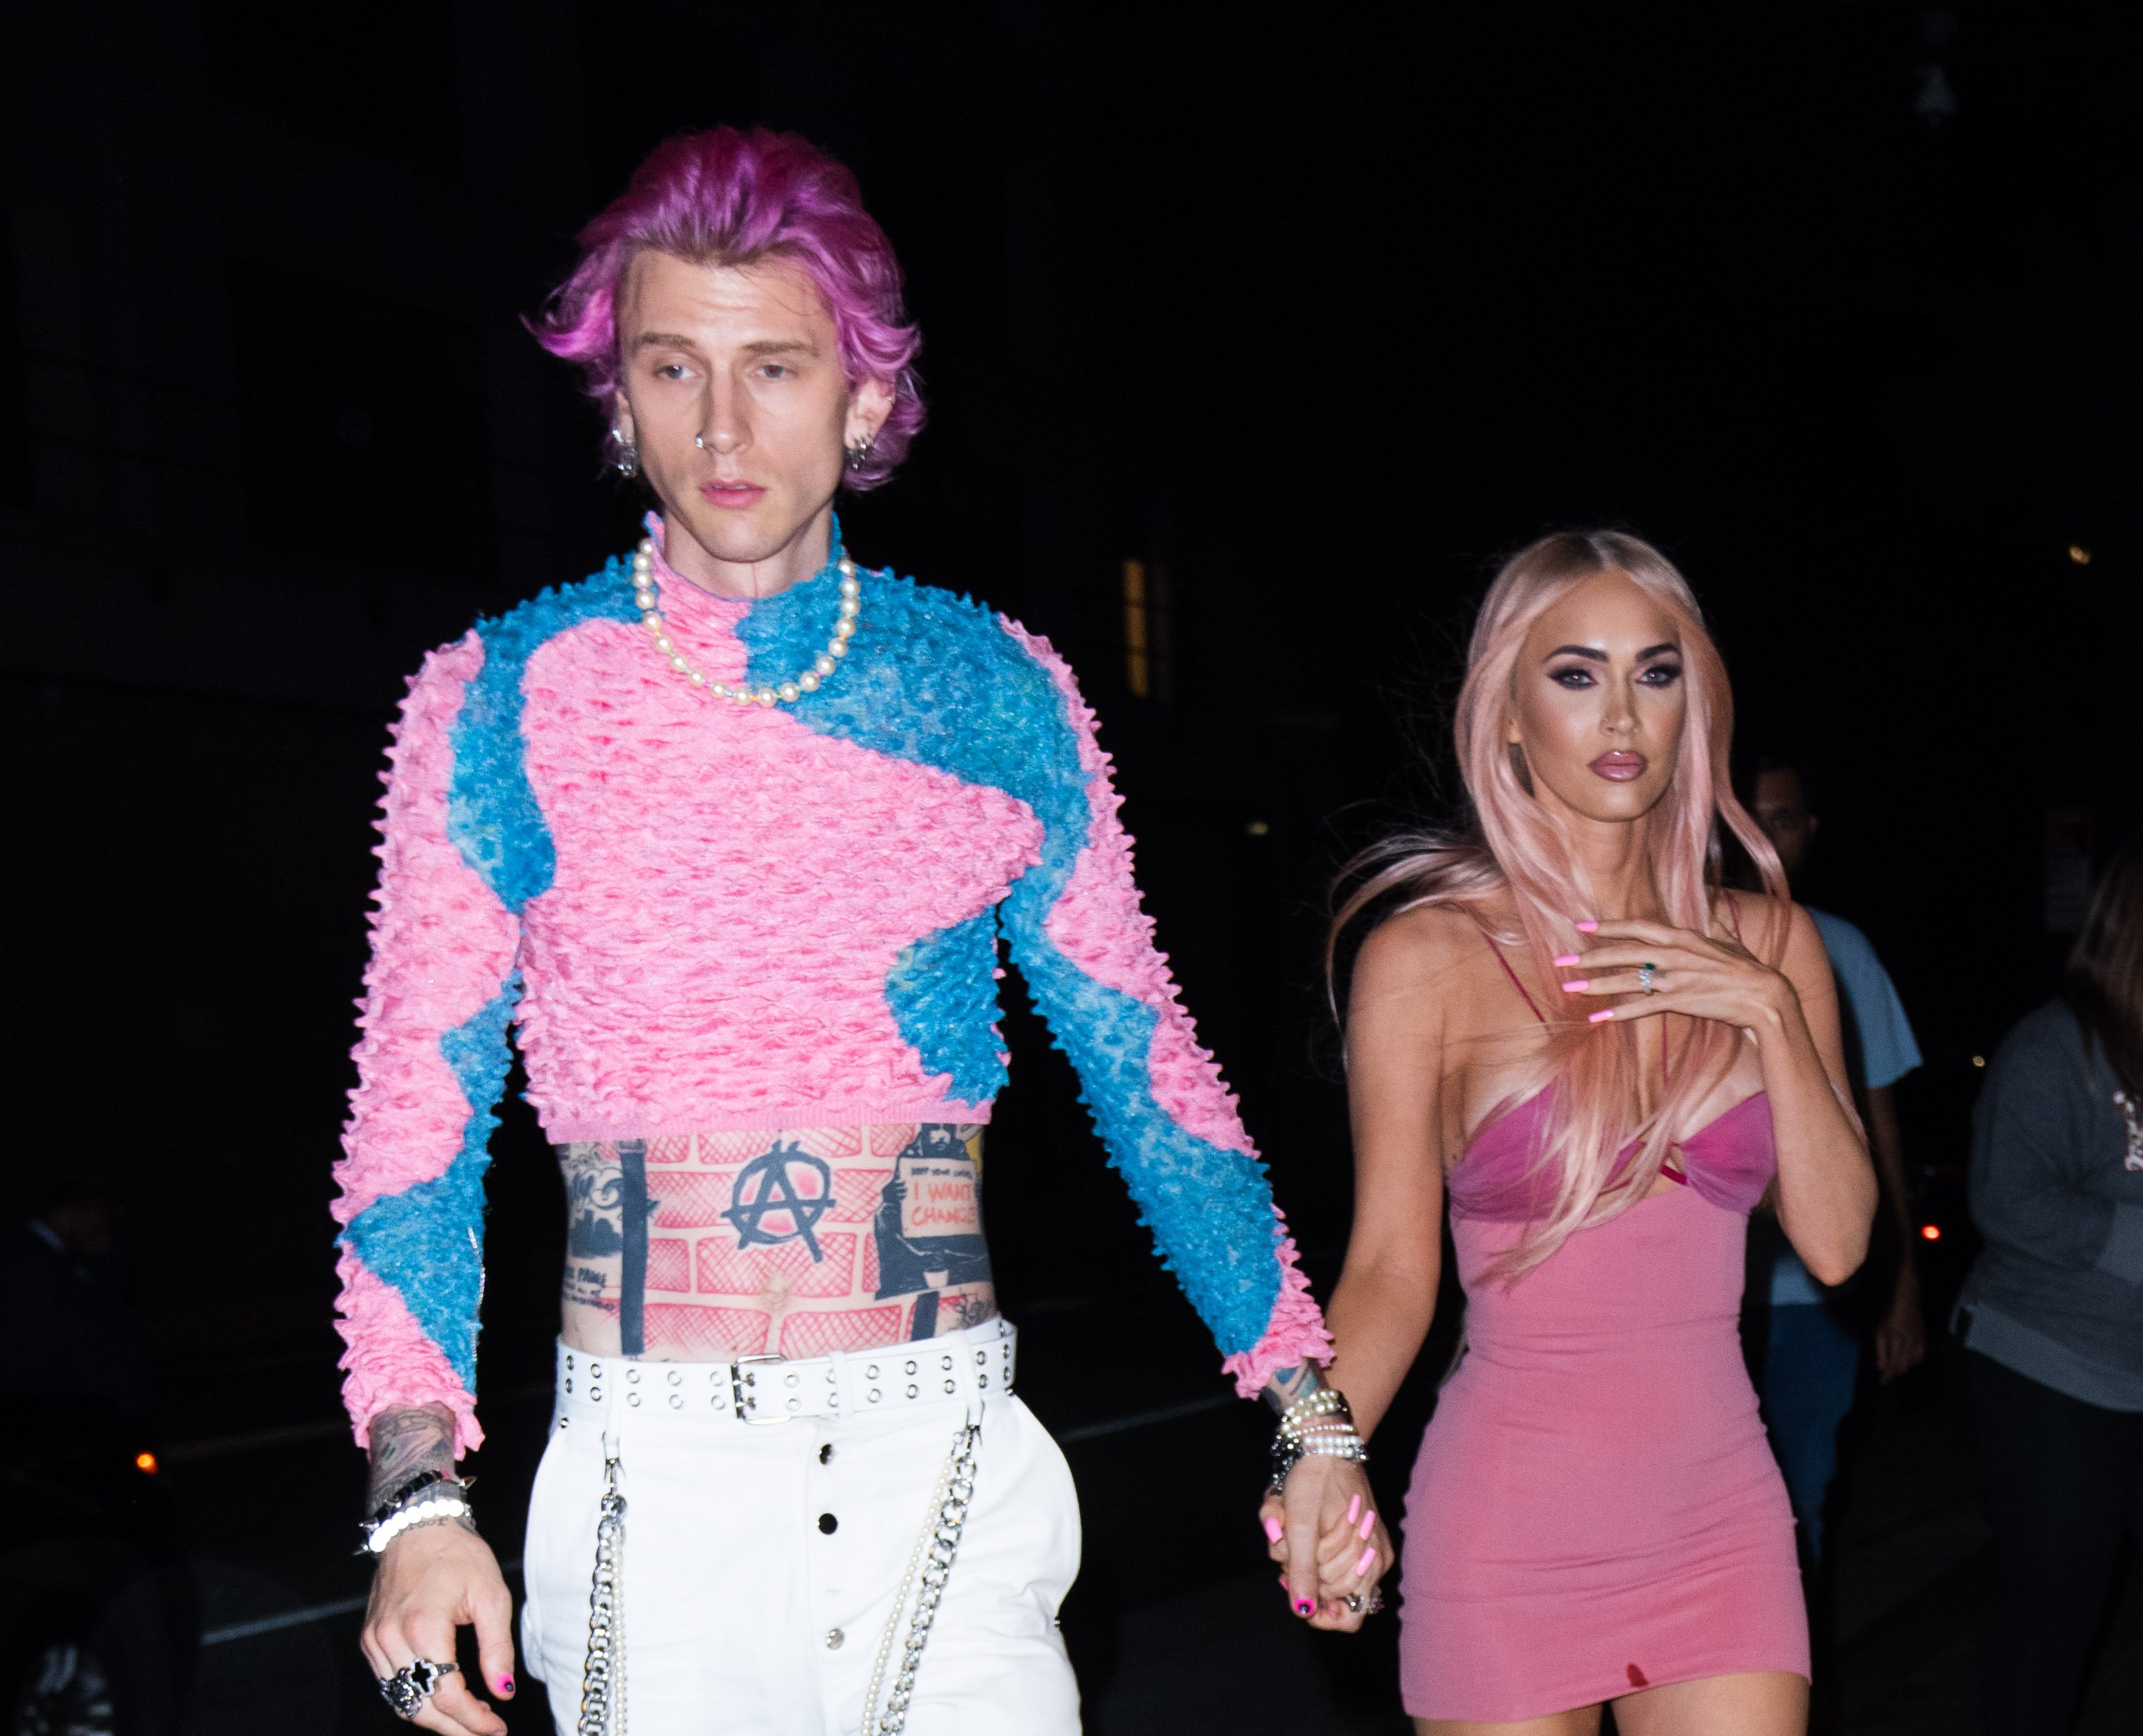 Who Is Emma Cannon? Meet Machine Gun Kelly's Ex and Mother of His Daughter